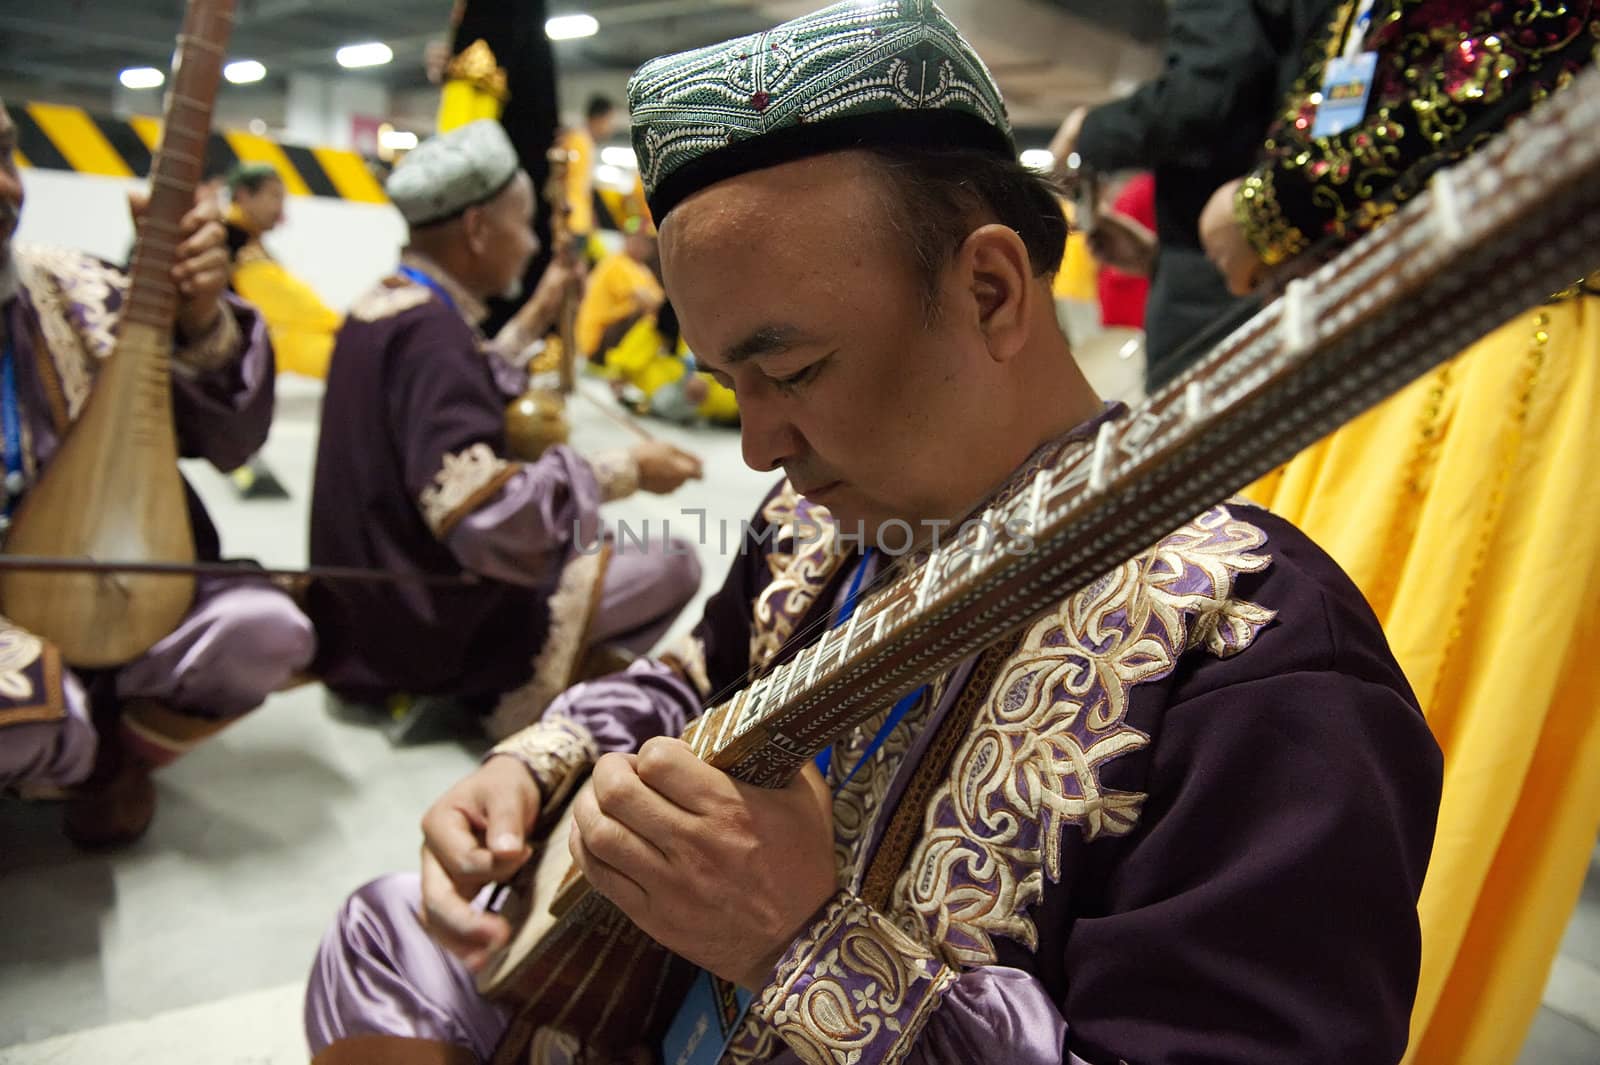 CHENGDU - MAY 29: Uighur Maixirefu folk musician performs in the 3rd International Festival of the Intangible Cultural Heritage.May 29, 20011 in Chengdu, China.